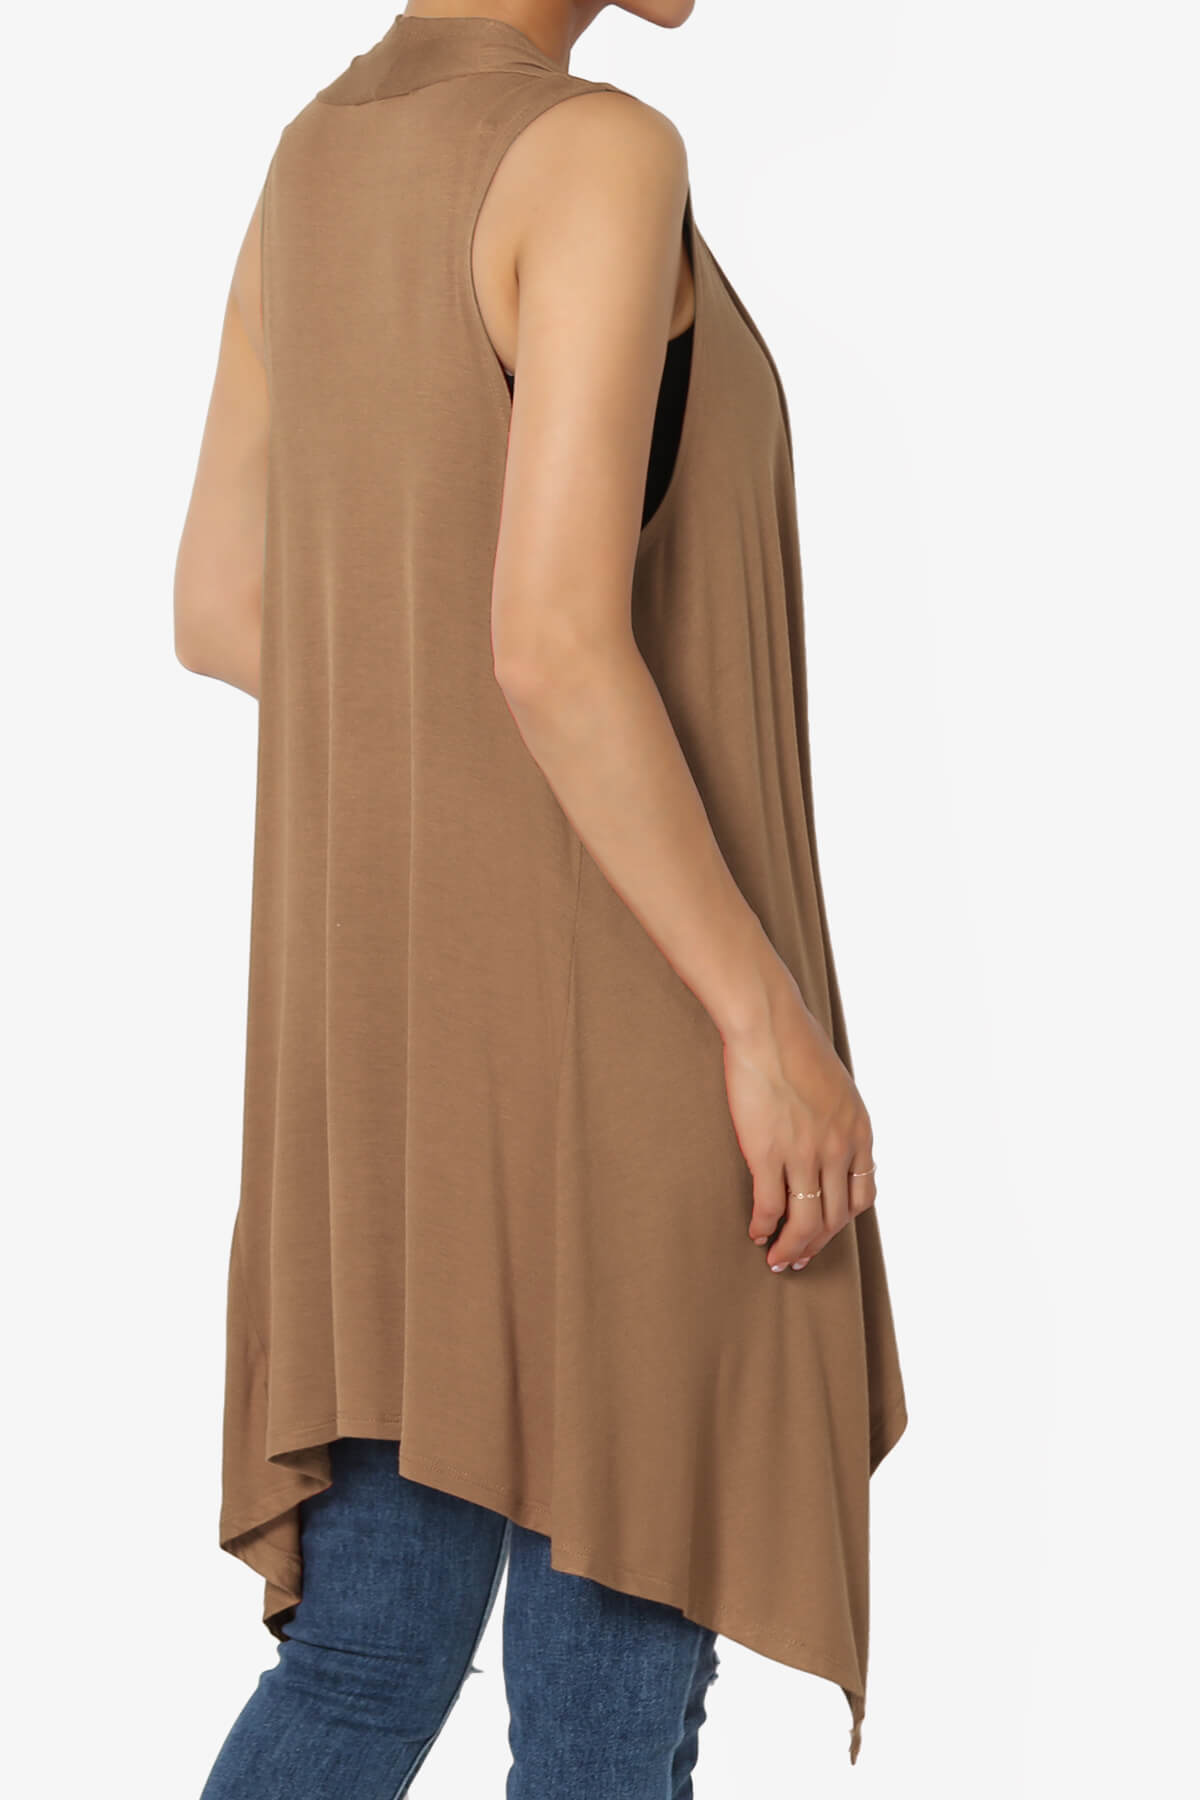 Load image into Gallery viewer, Taysom Draped Open Front Sleeveless Cardigan Vest DEEP CAMEL_4
